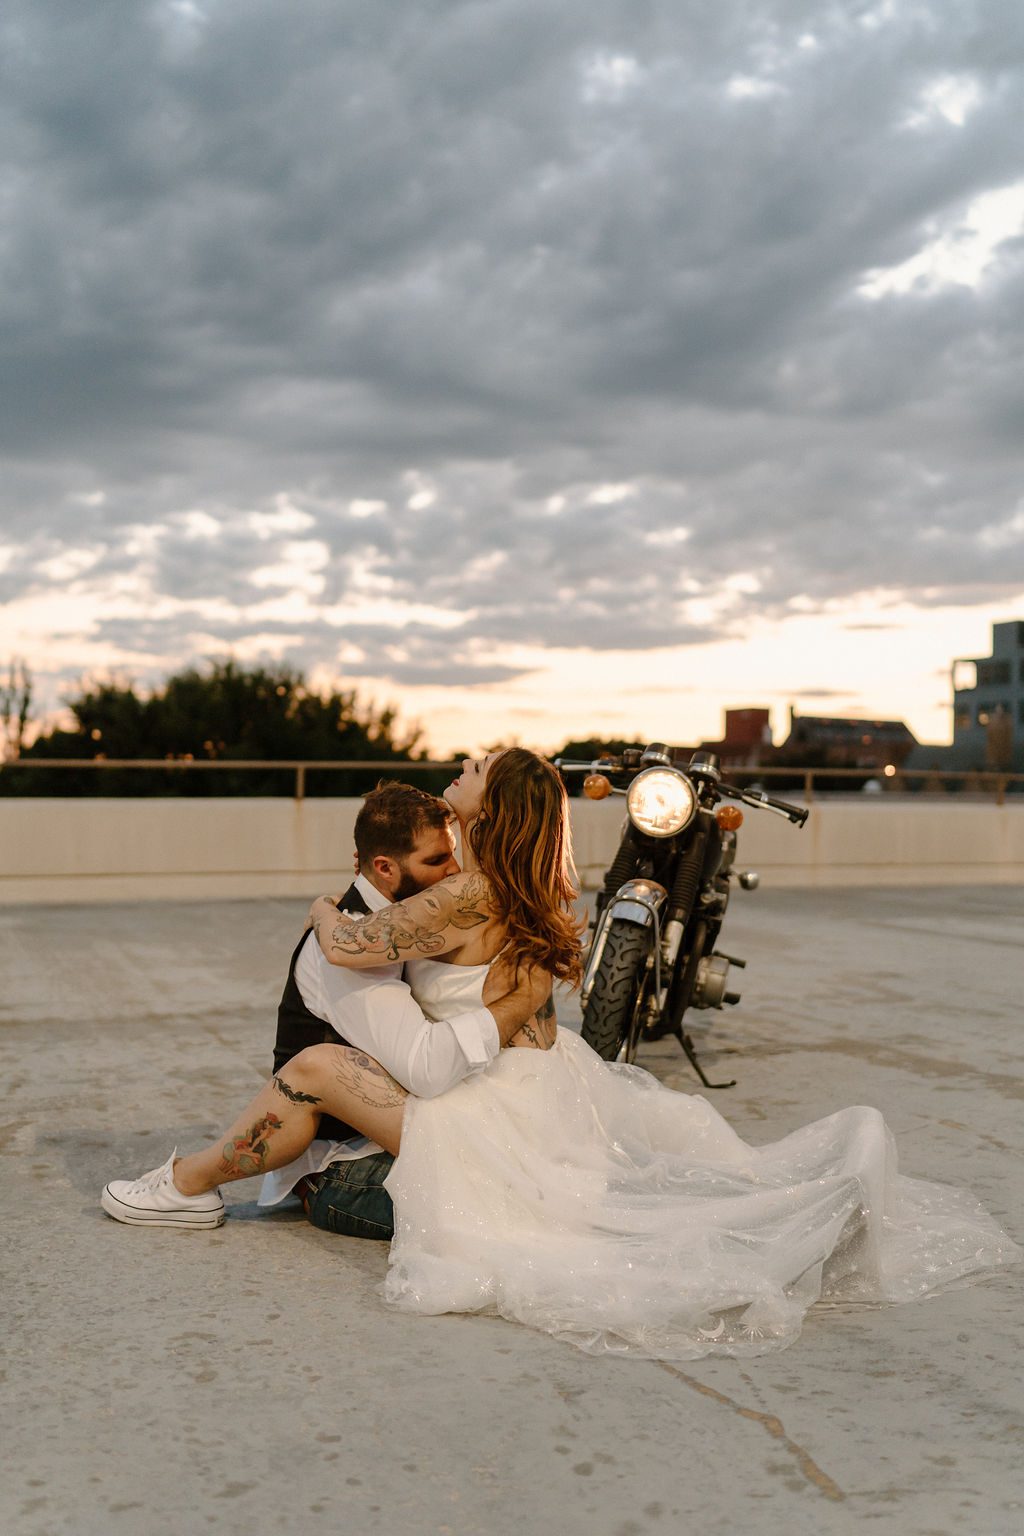 fun urban city elopement With Motorcycle on rooftop sunset in north  carolina